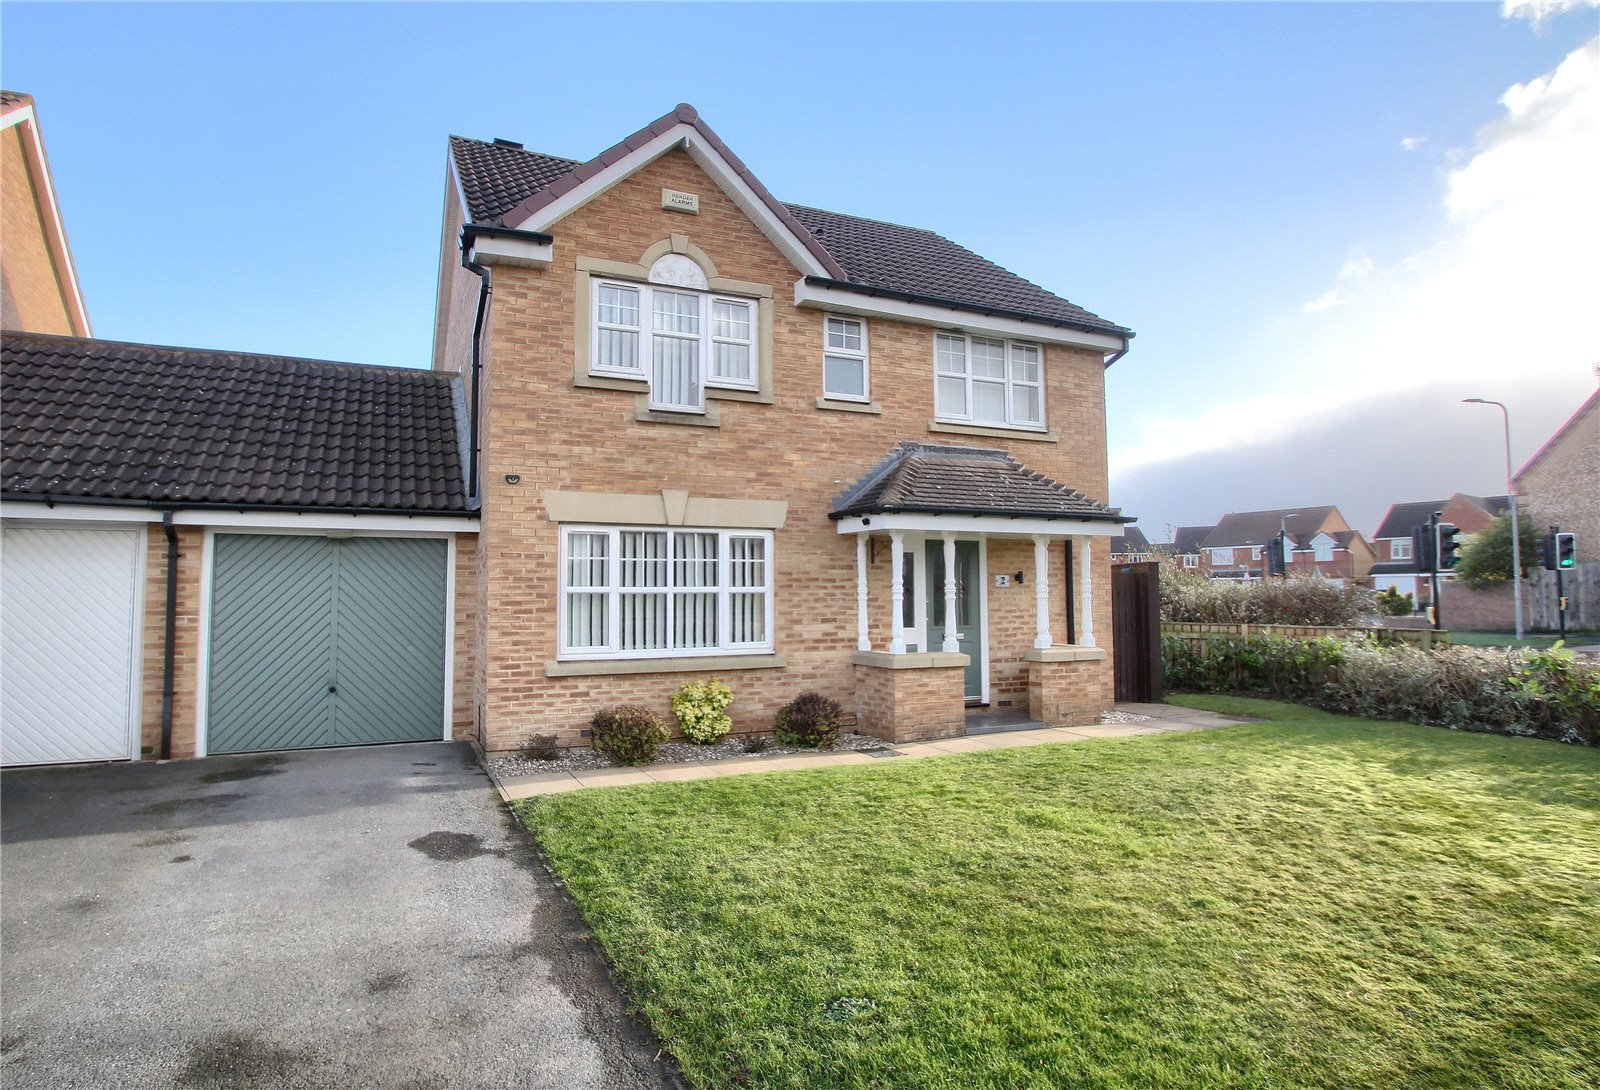 4 bed house for sale in Brecon Crescent, Ingleby Barwick  - Property Image 1